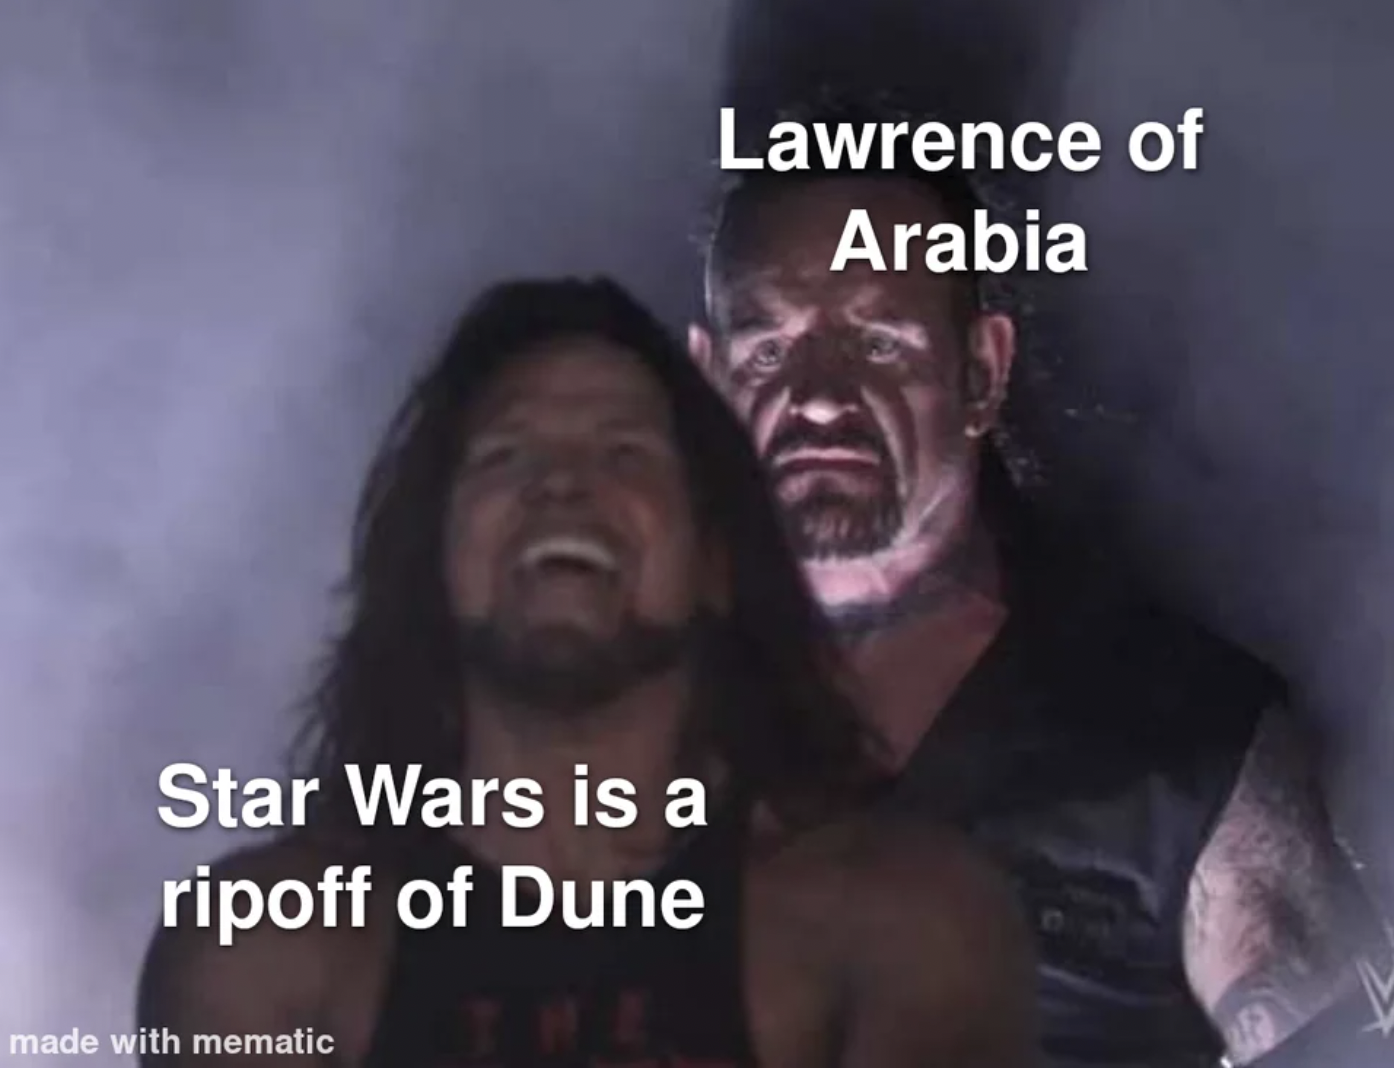 photo caption - Star Wars is a ripoff of Dune made with mematic Lawrence of Arabia